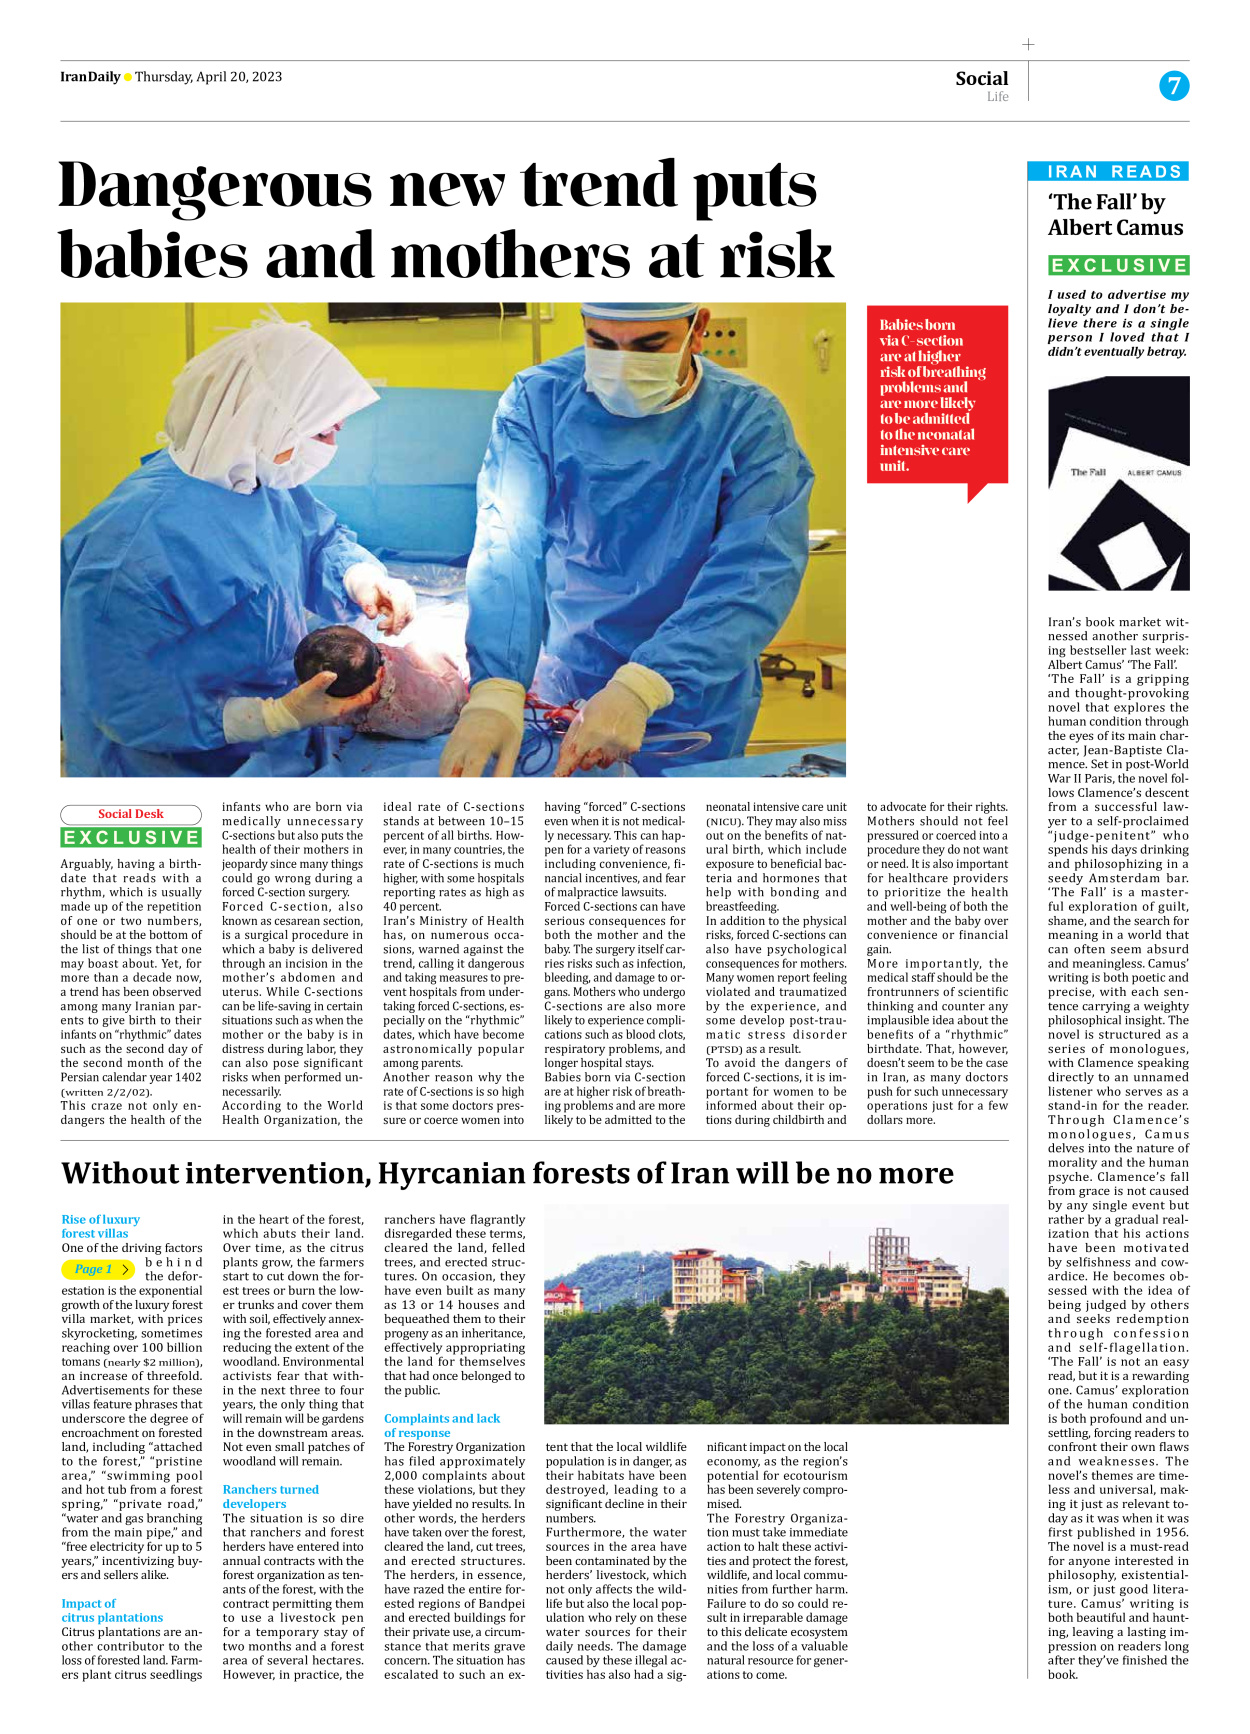 Iran Daily - Number Seven Thousand Two Hundred and Seventy Three - 20 April 2023 - Page 7